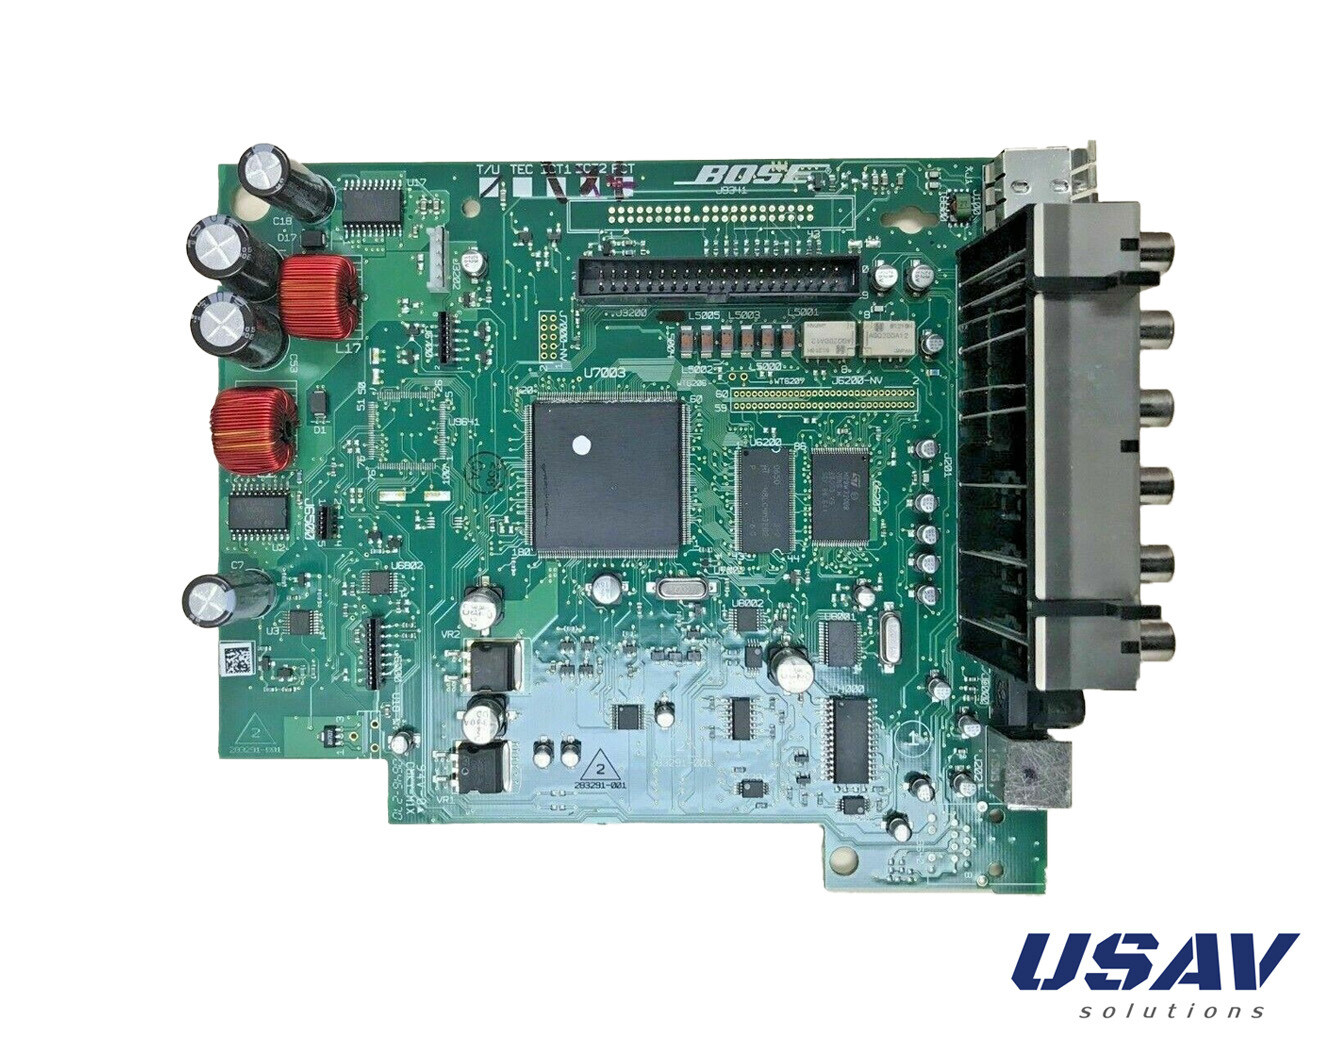 BOSE MAIN CIRCUIT BOARD FOR PCB, for Bose 321 II Media Center 286173-107